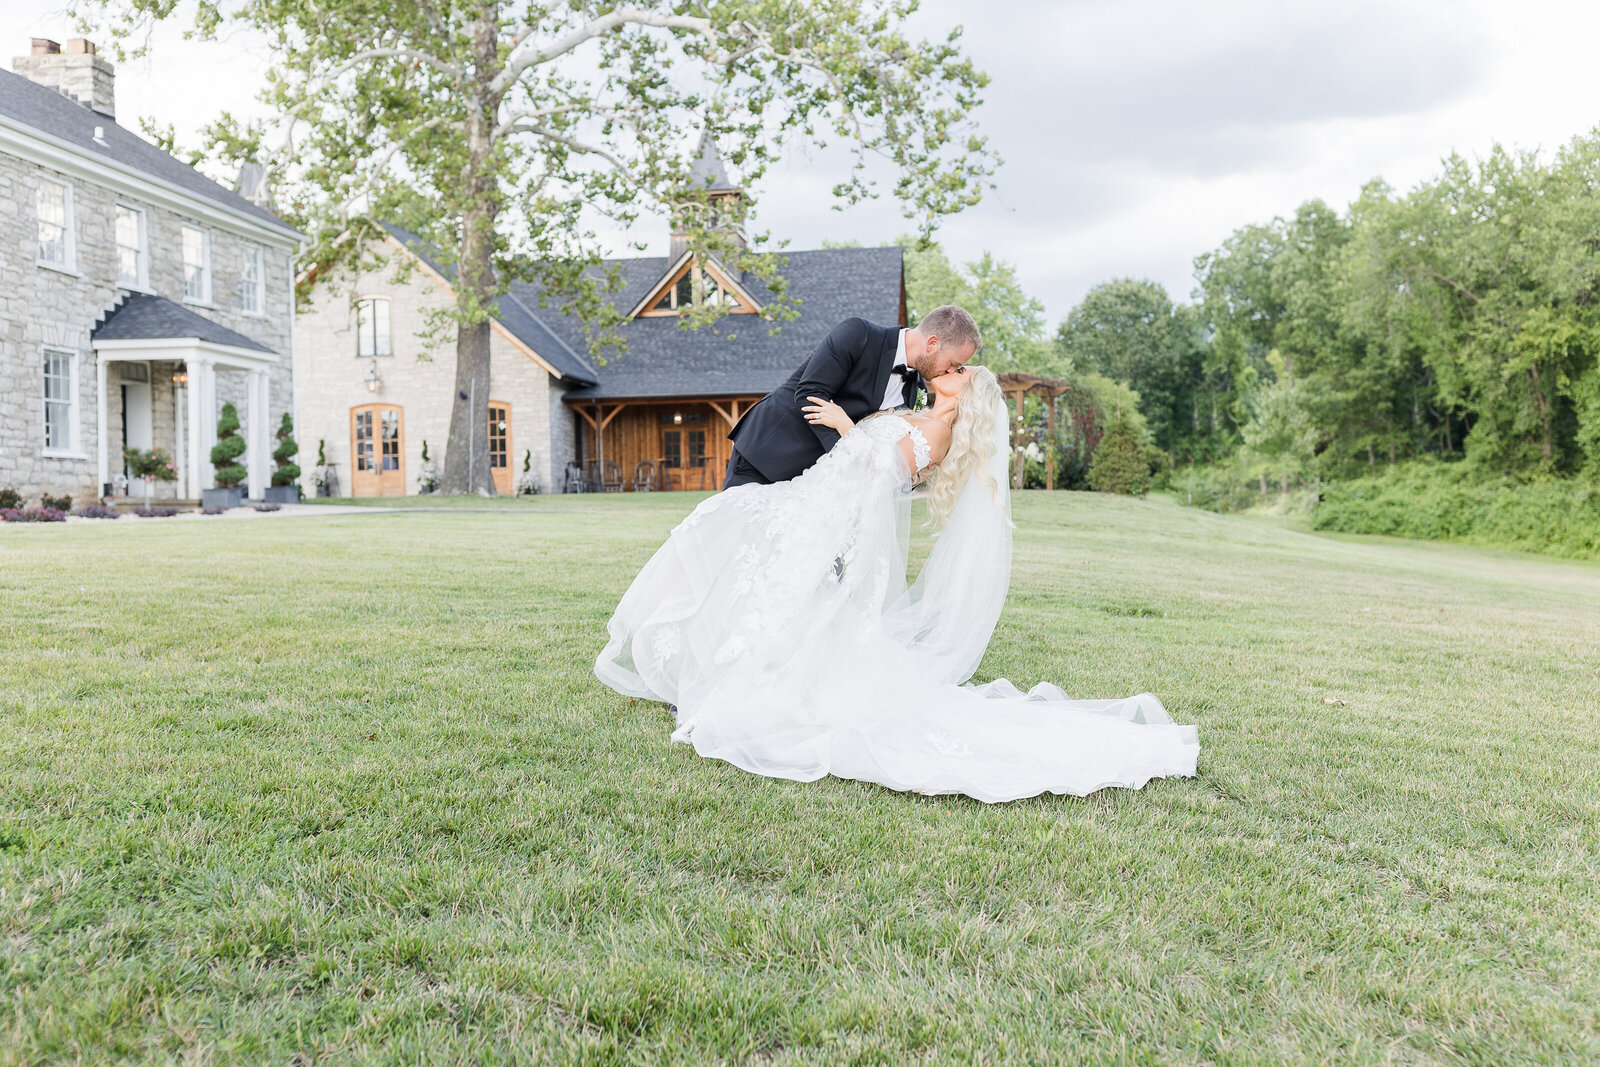 Wedding at Stone House of St. Charles in St. Charles Missouri